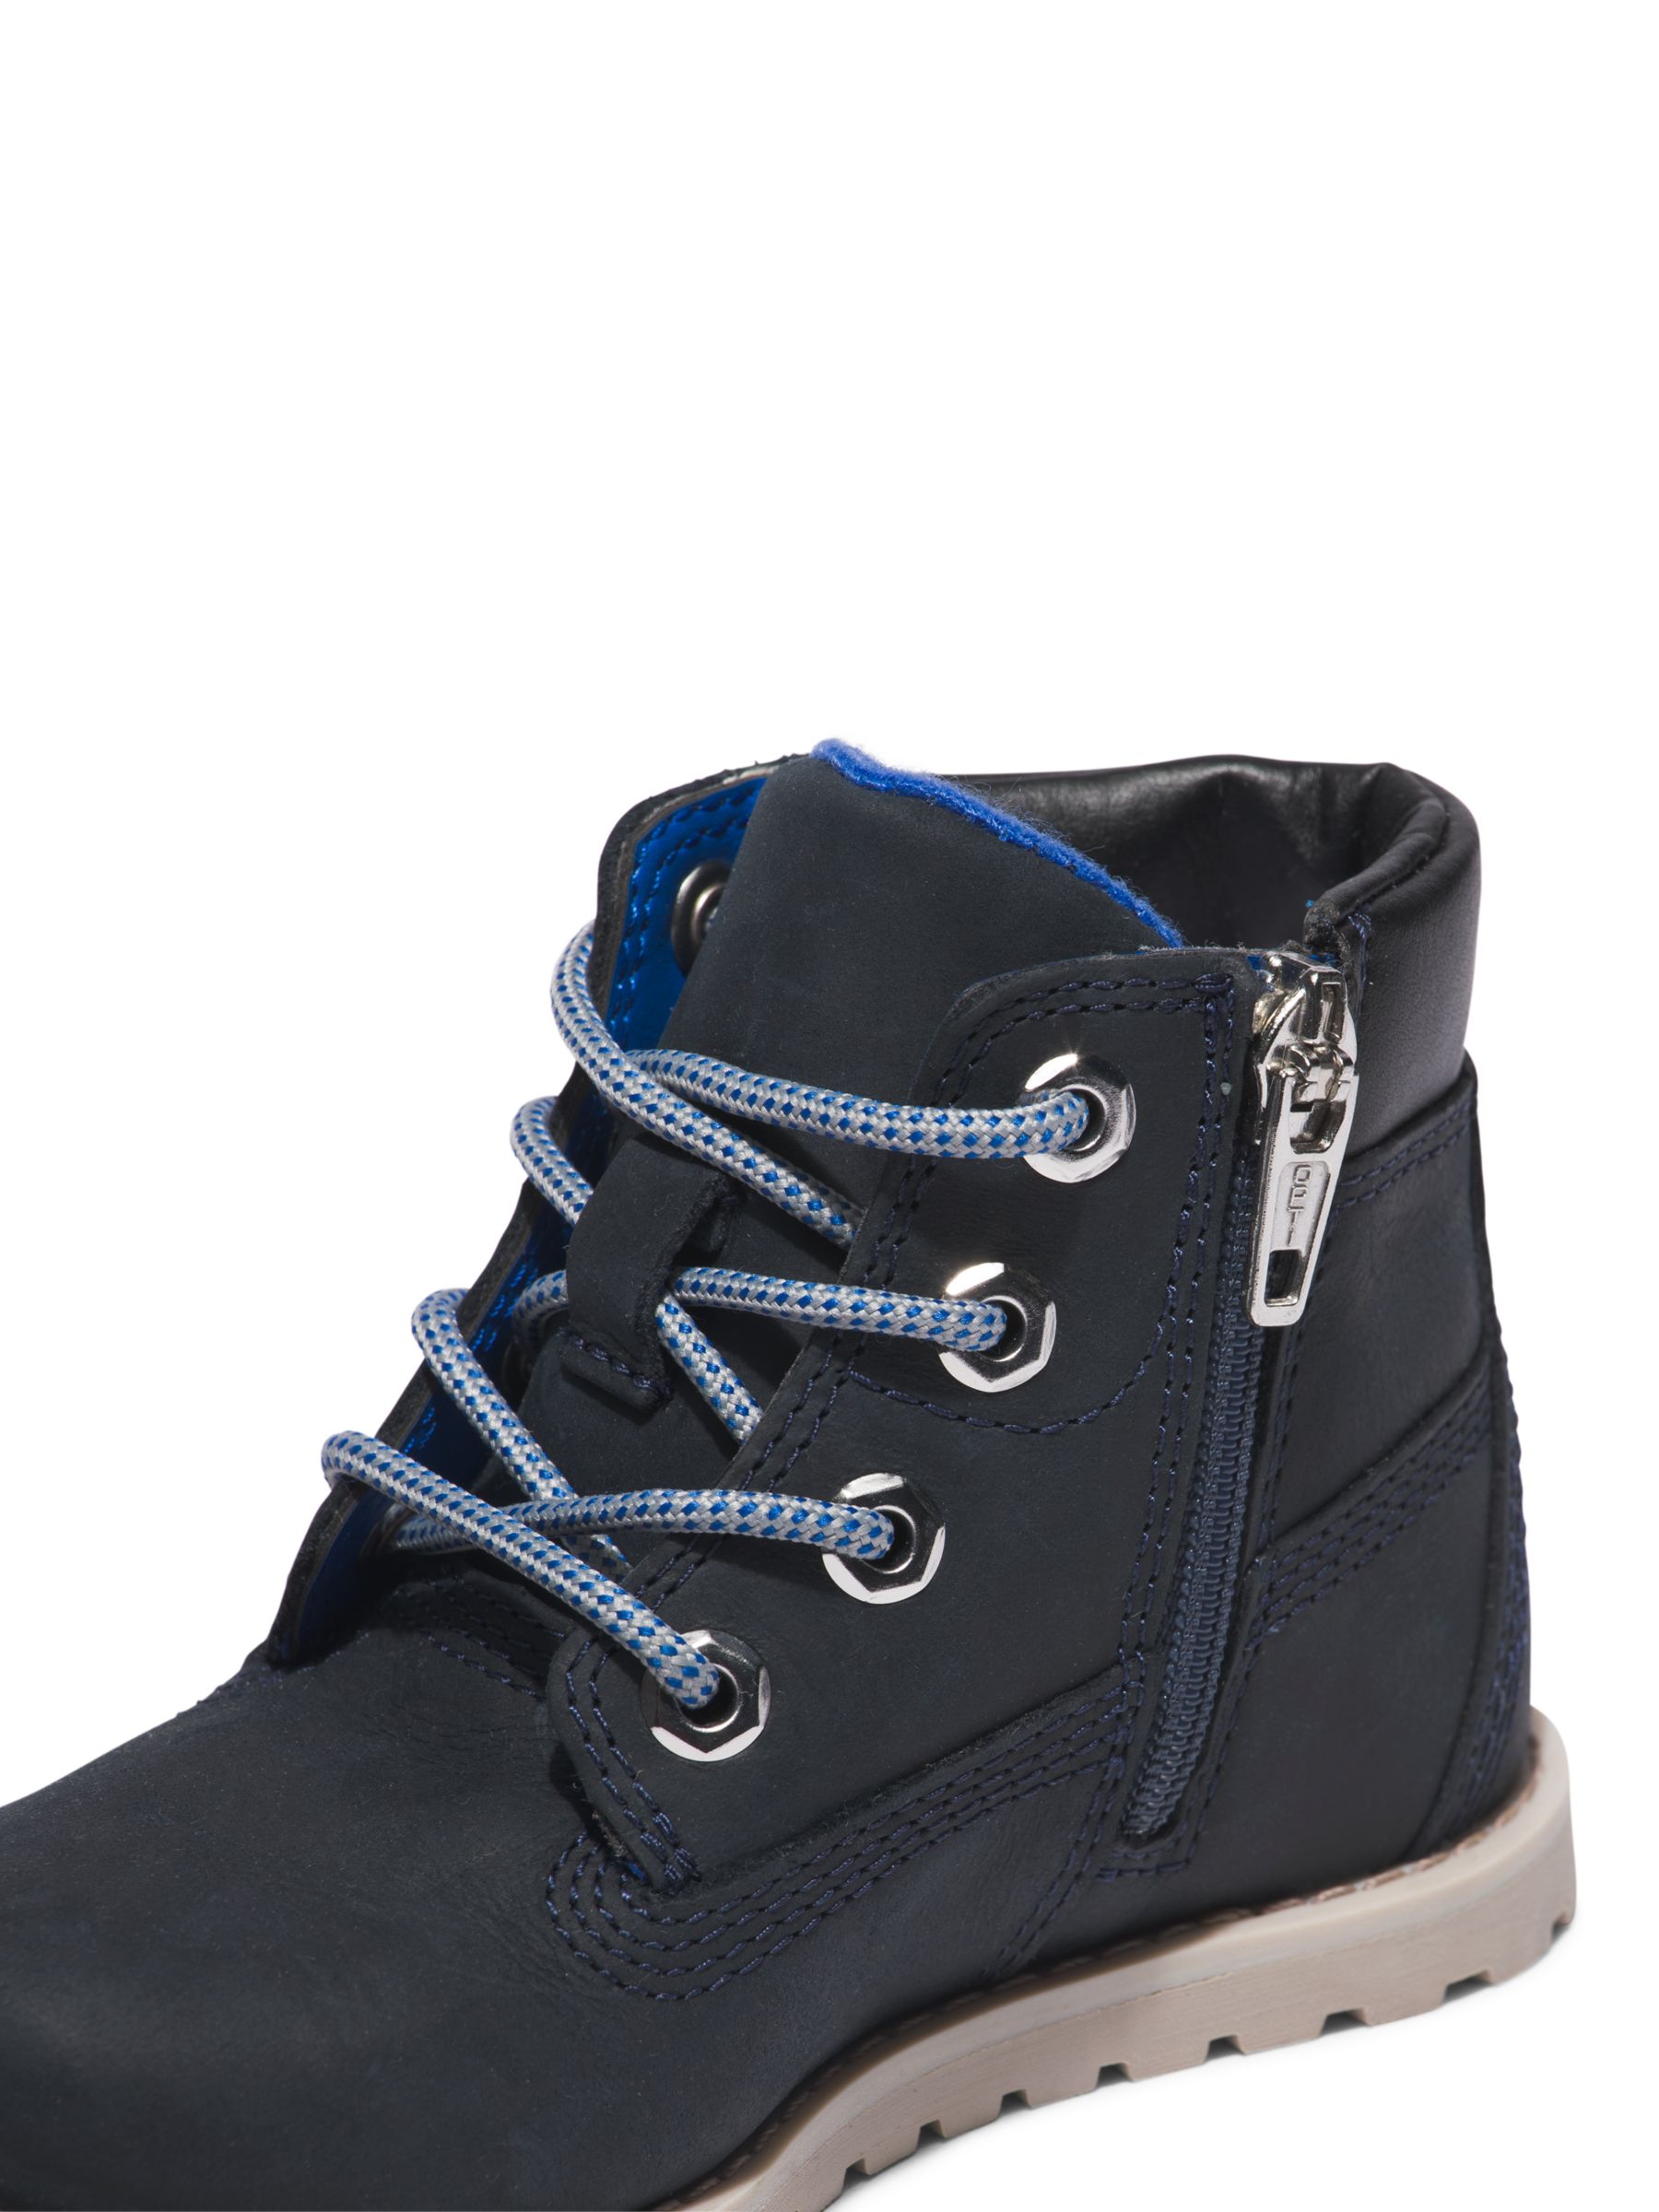 Timberland Kids' Pokey Pine Ankle Boots, Navy, 21